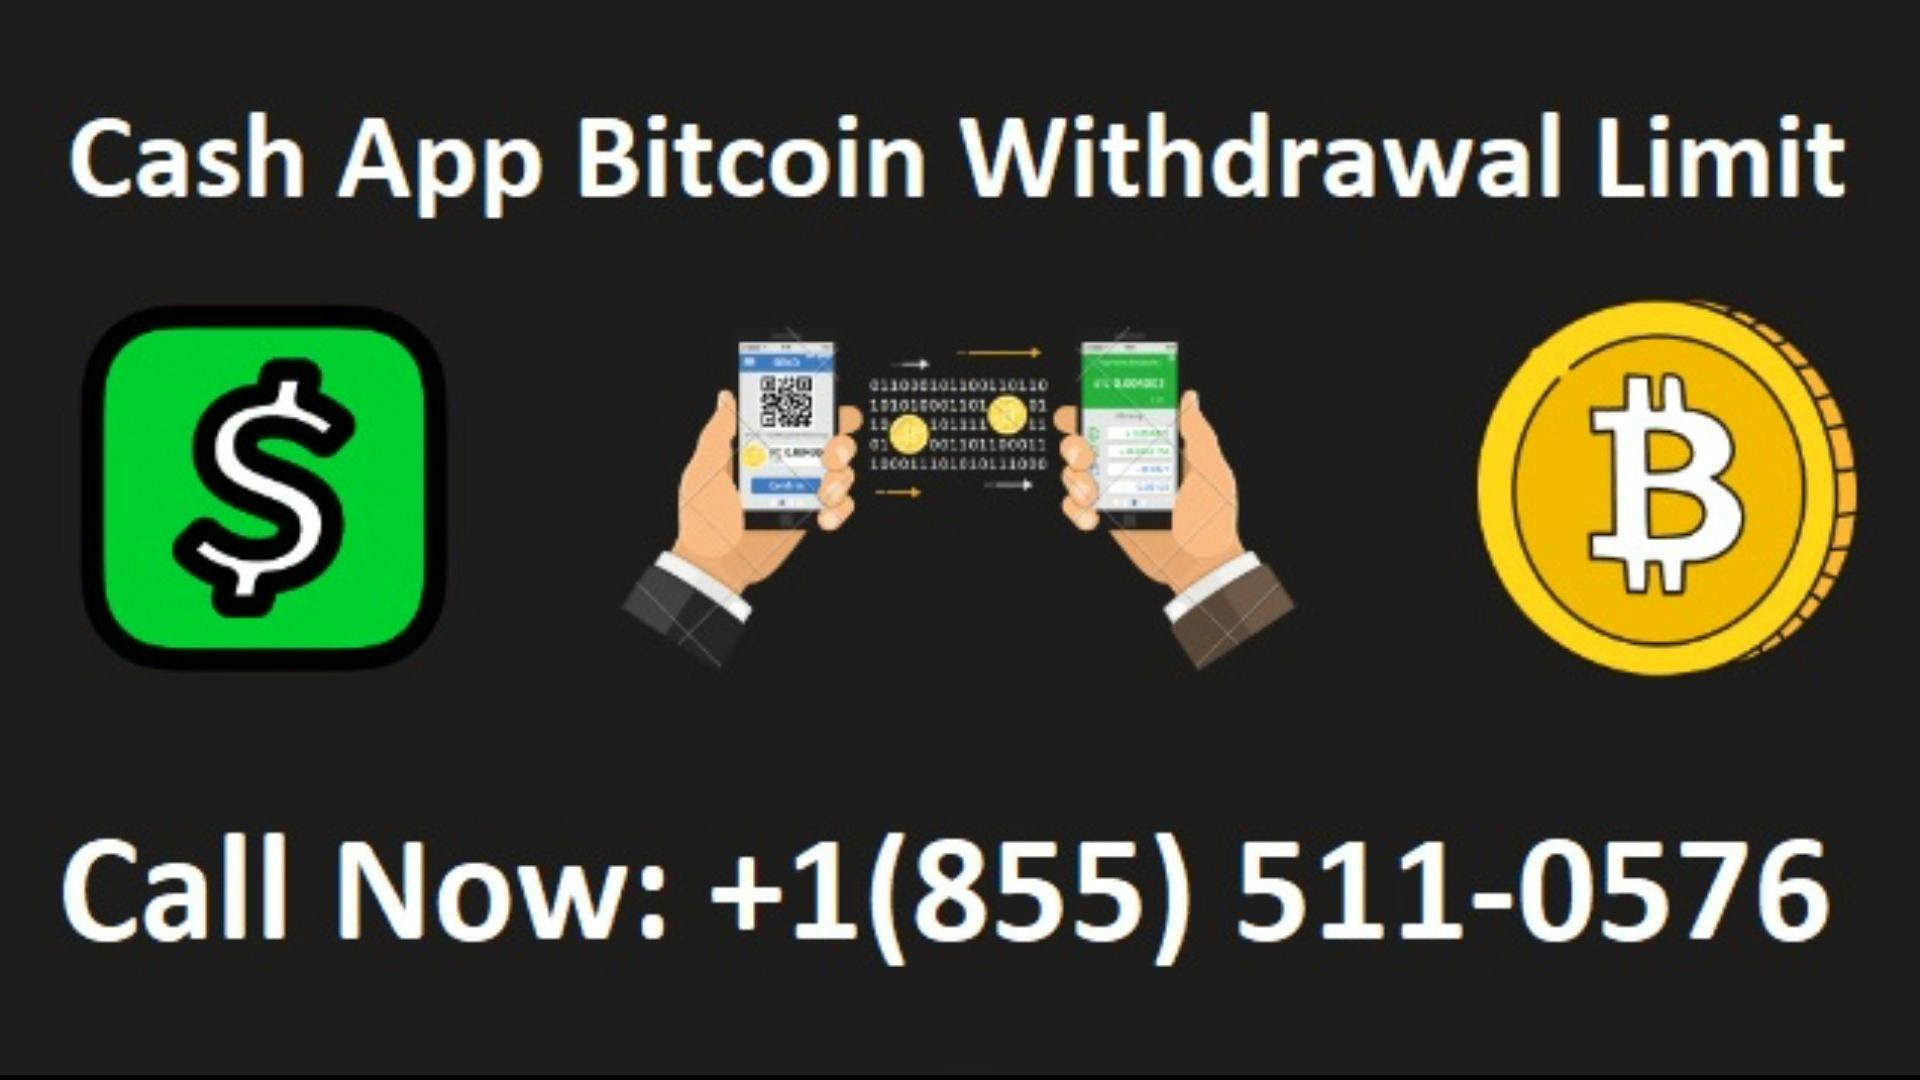 How can I increase my Cash App Bitcoin withdrawal limit?